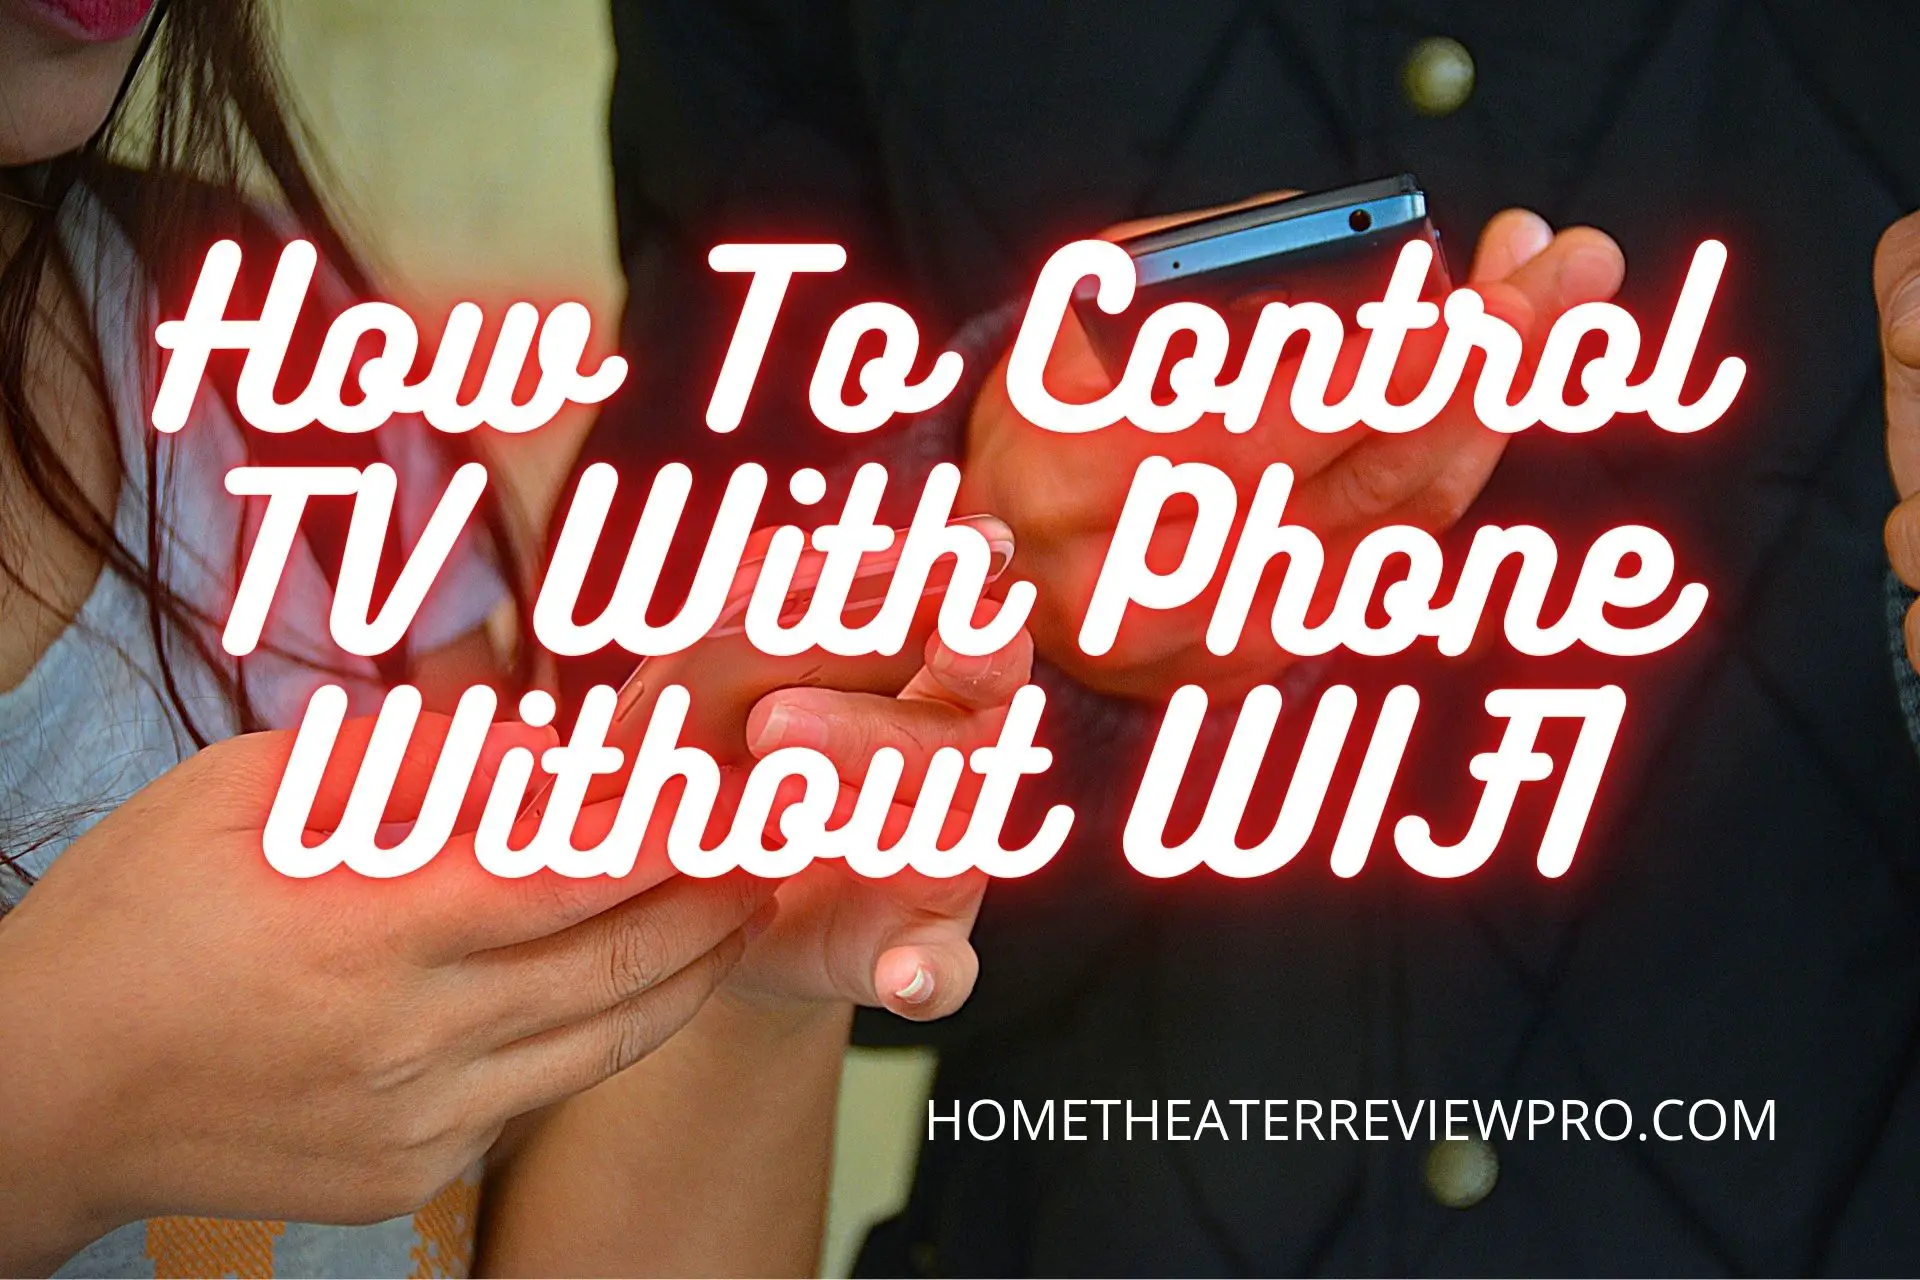 How To Control TV With Phone Without WIFI